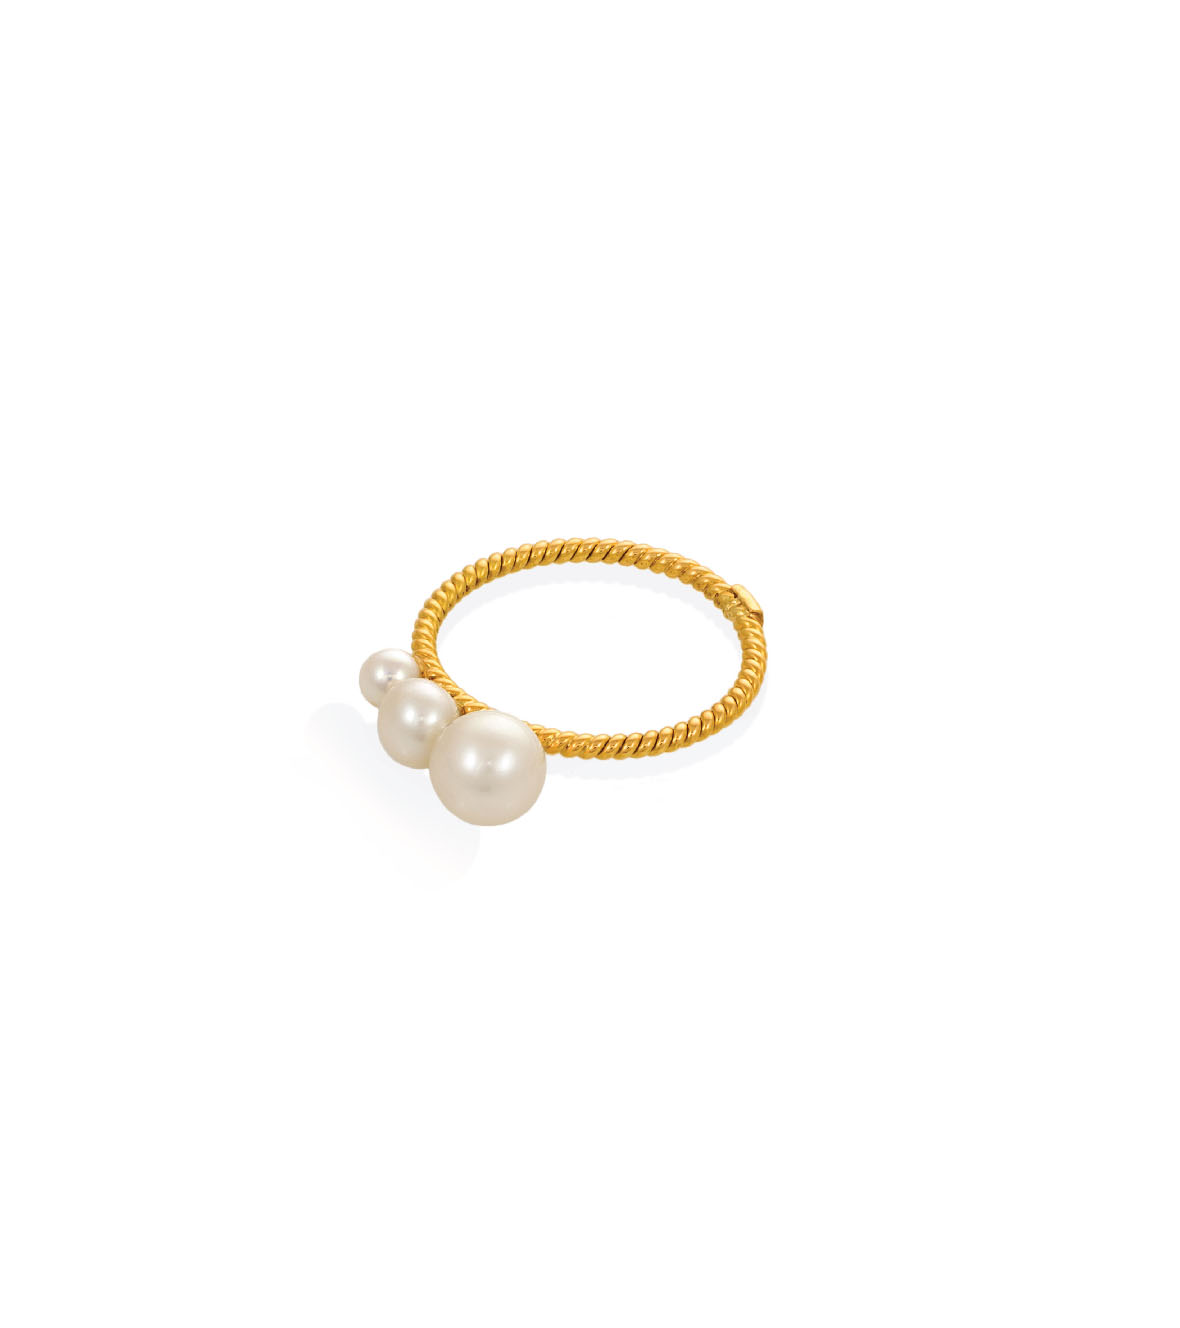 Basic Round Ring with Pearls By Christina Soubli